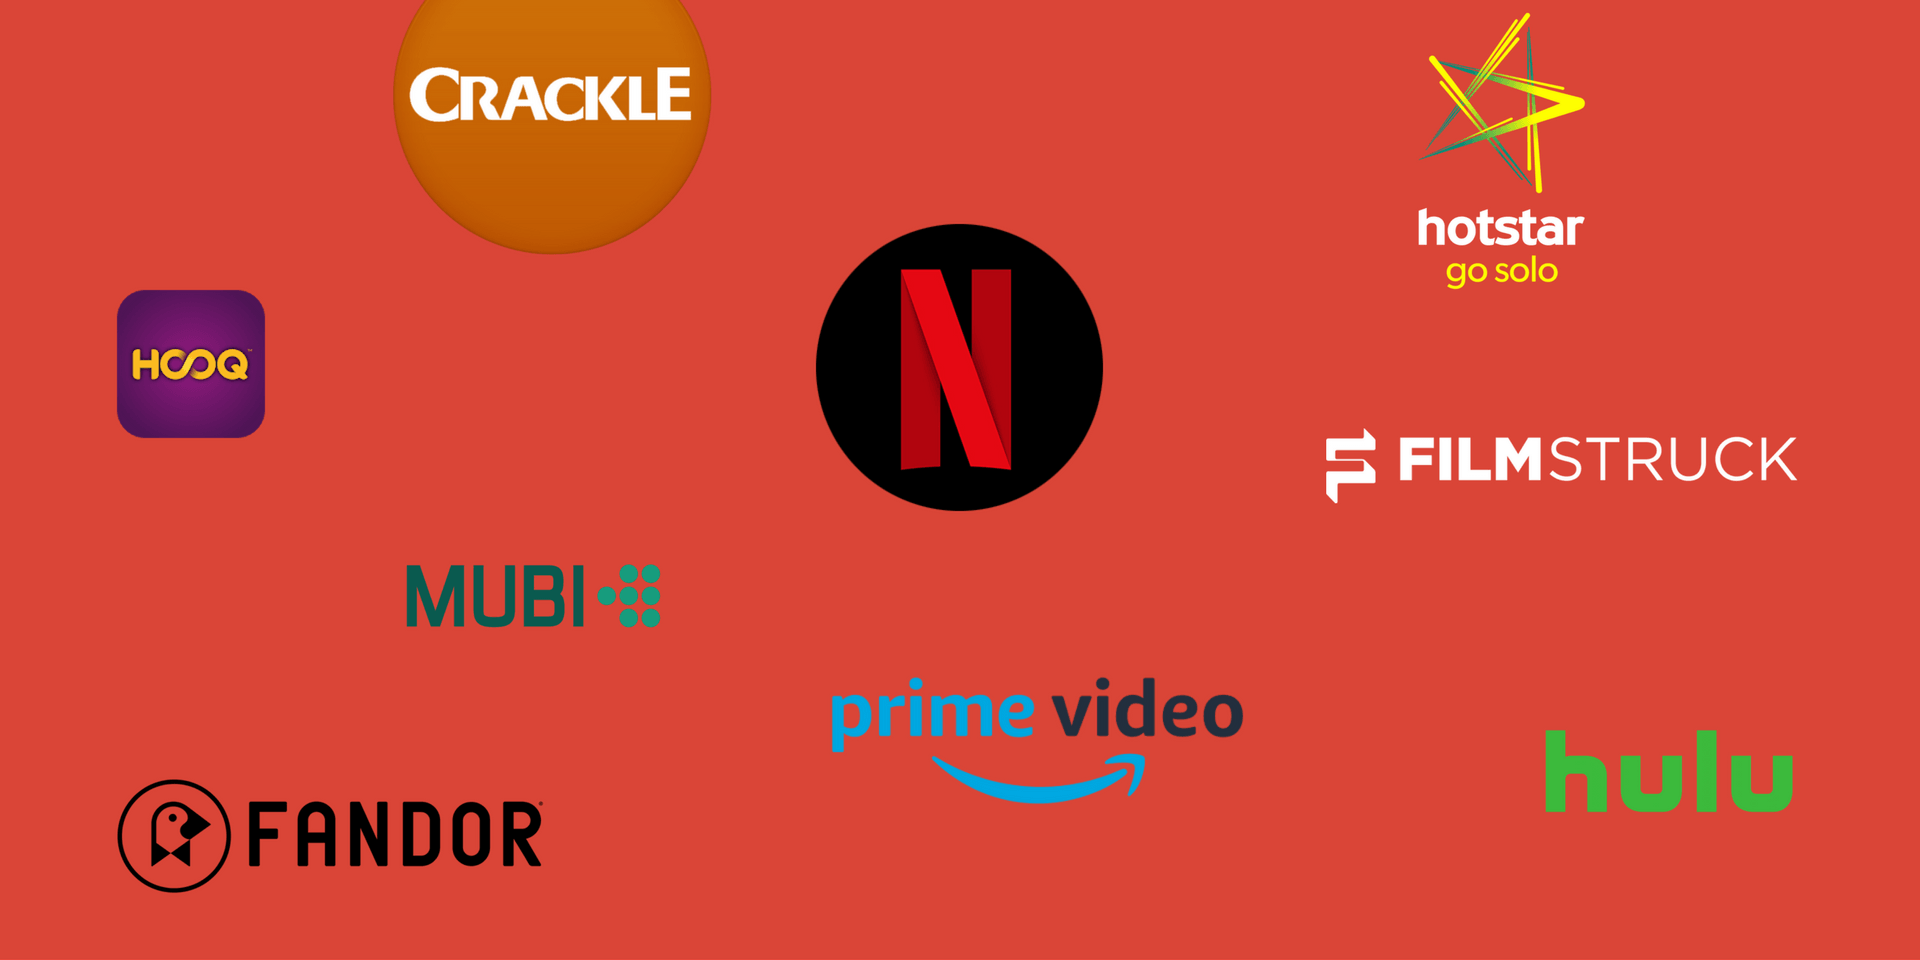 amazon-prime-video-hotstar-netflix-hulu-which-one-is-the-best-online-streaming-channel-of-2019